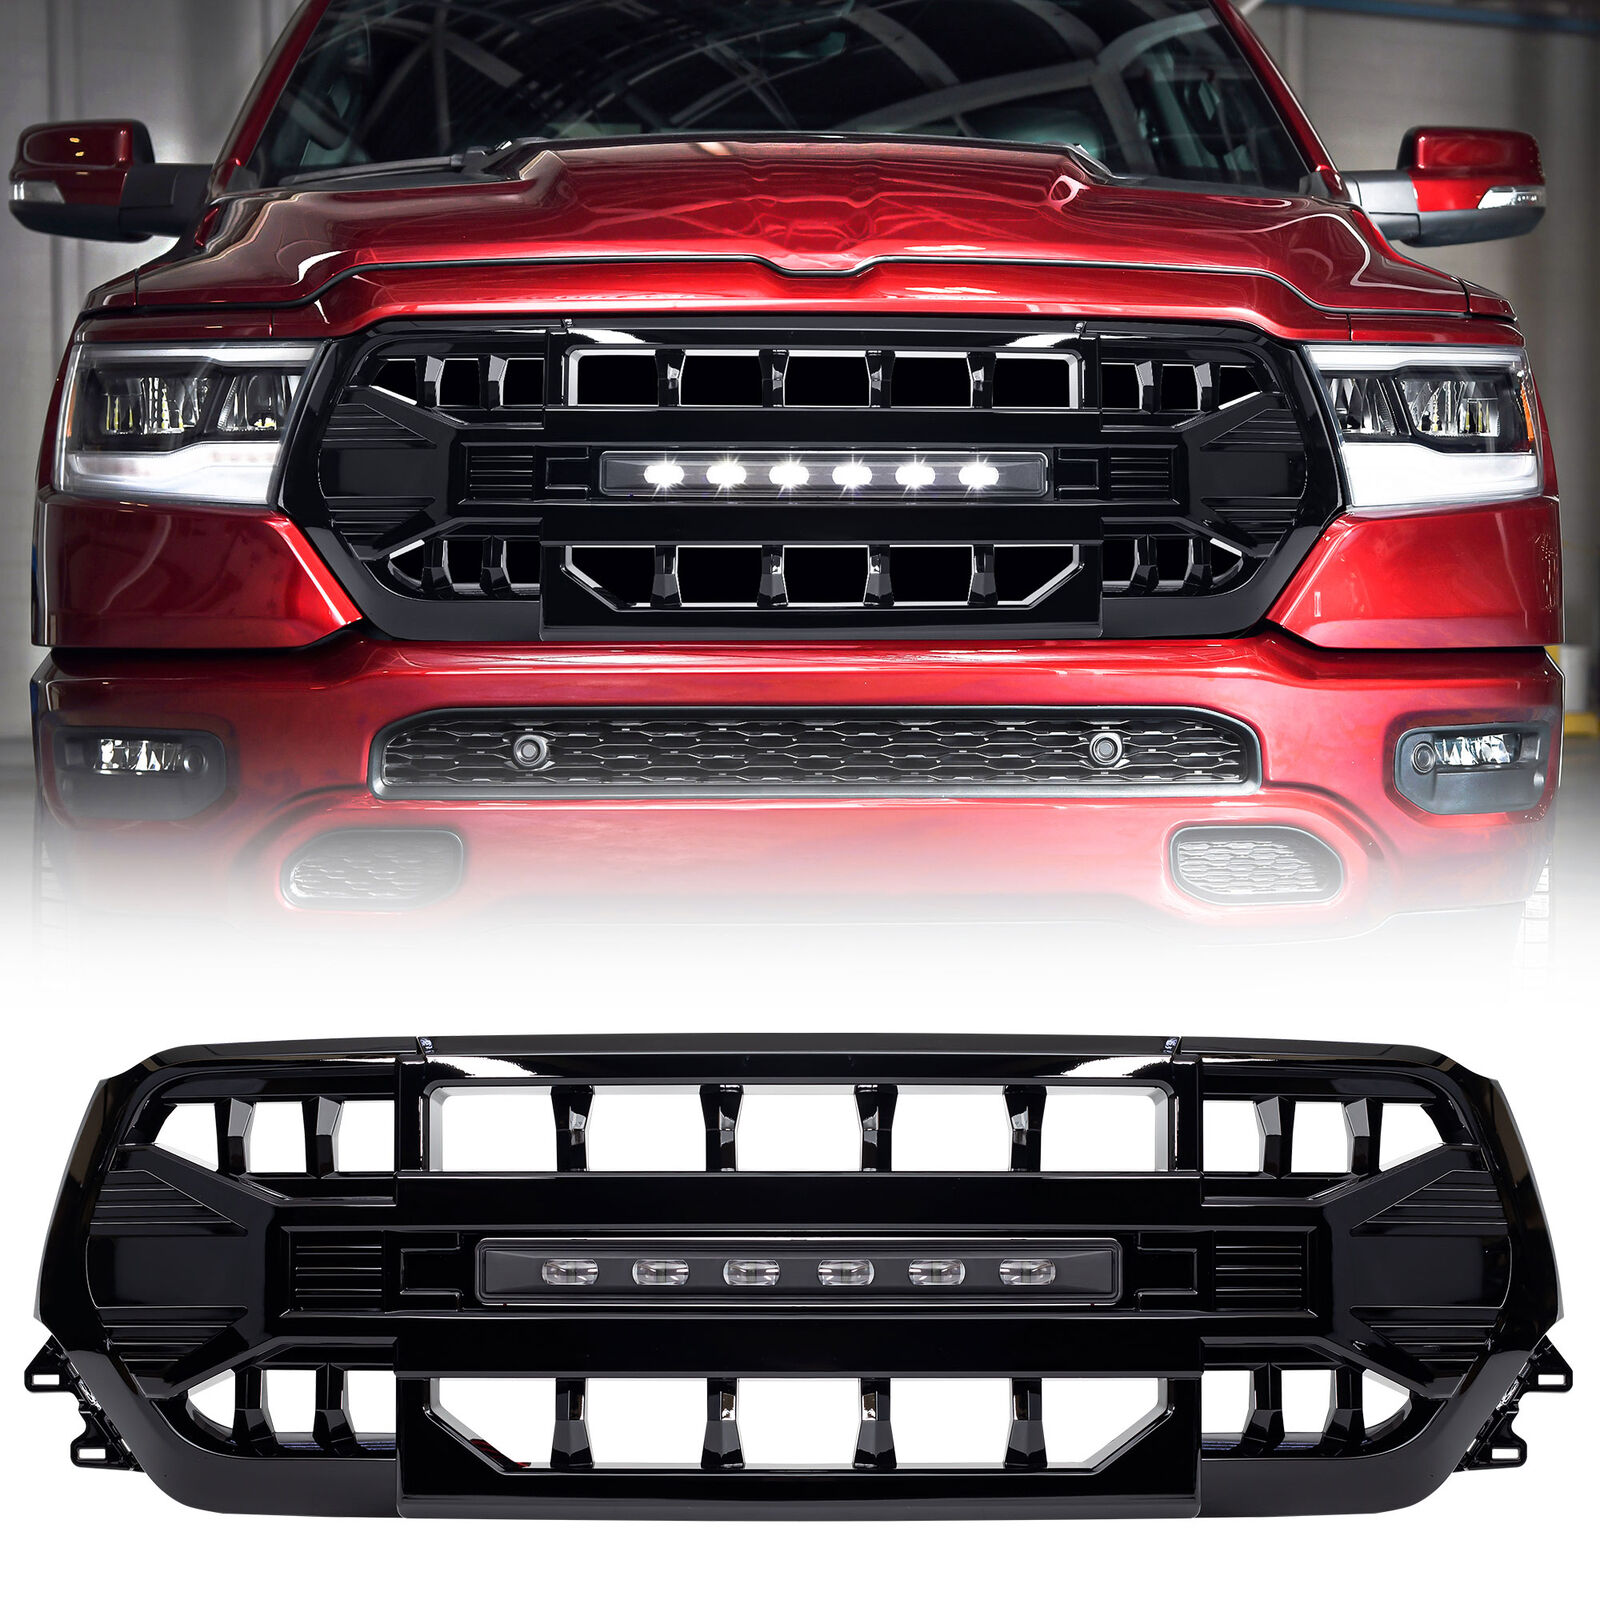 AMERICAN MODIFIED Armor Front Grille for 2019 to 2024 Dodge Ram, Glossy Black